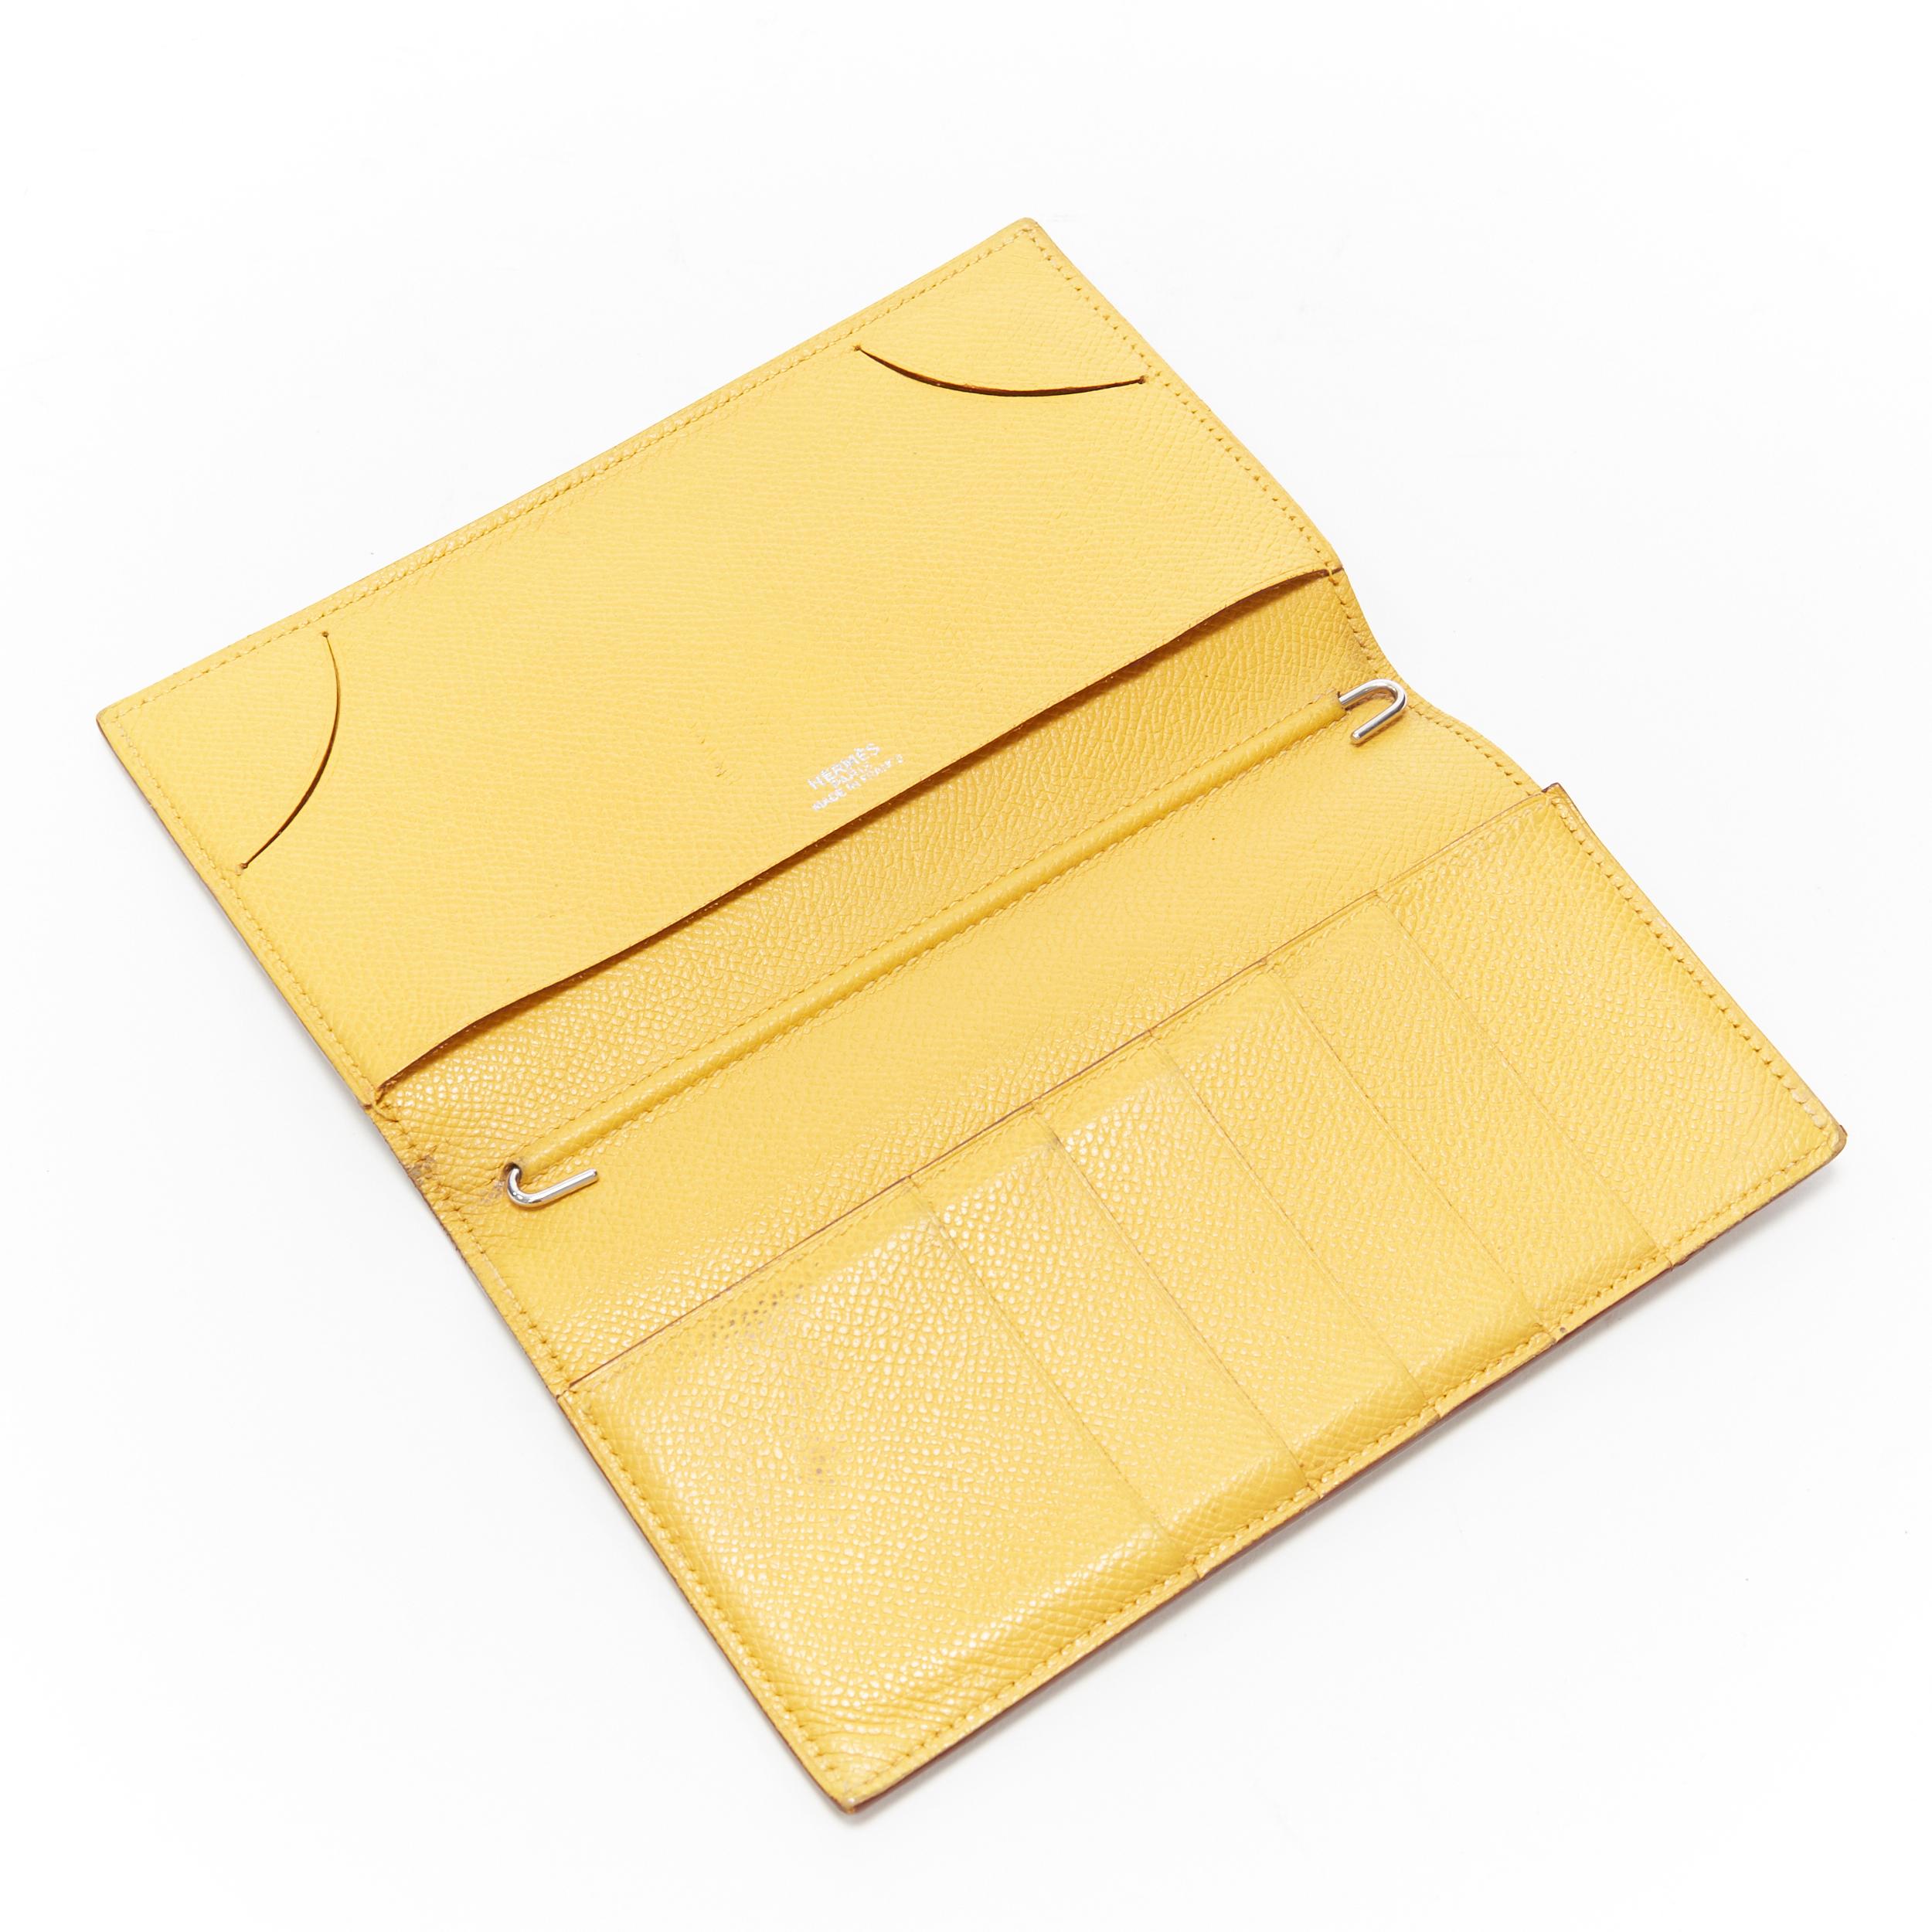 HERMES tan leather contrast yellow lining minimal long bi fold wallet 
Reference: UIHG/A00002 
Brand: Hermes 
Material: Leather 
Color: Brown
Pattern: Solid 
Extra Detail: Contrast yellow lining on outer. 
Made in: France 

CONDITION: 
Condition: